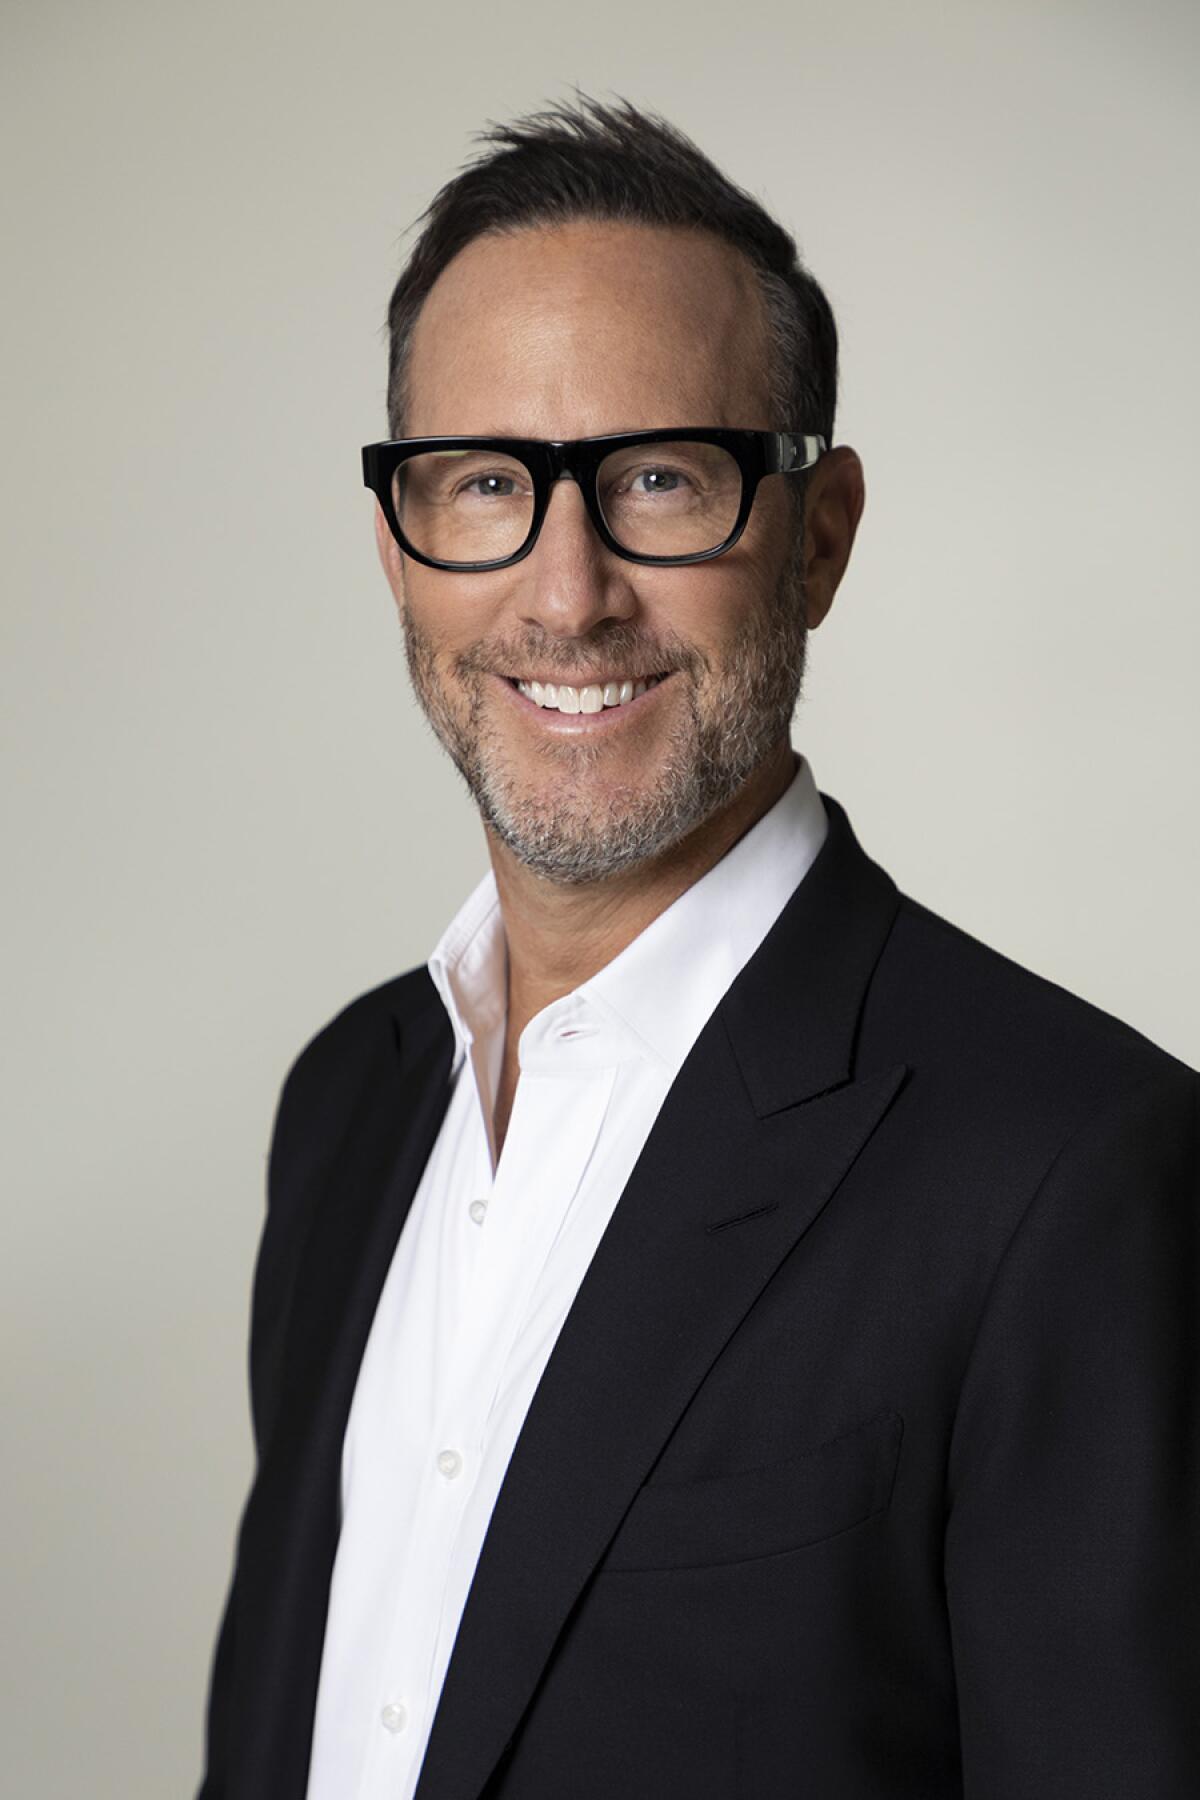 A man smiling in a suit and glasses.